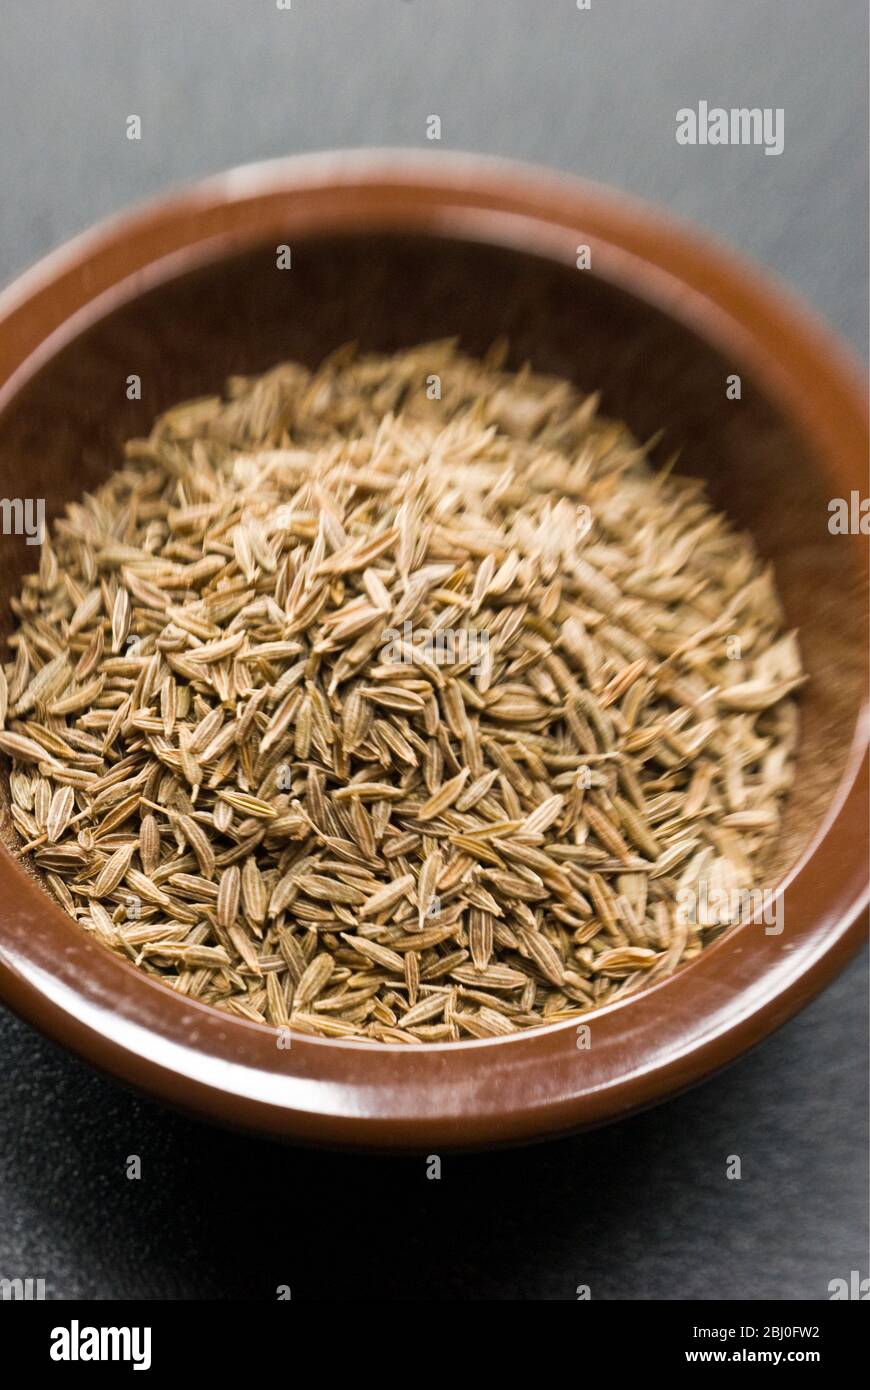 Whole dried cumin seeds in small bowl - Stock Photo